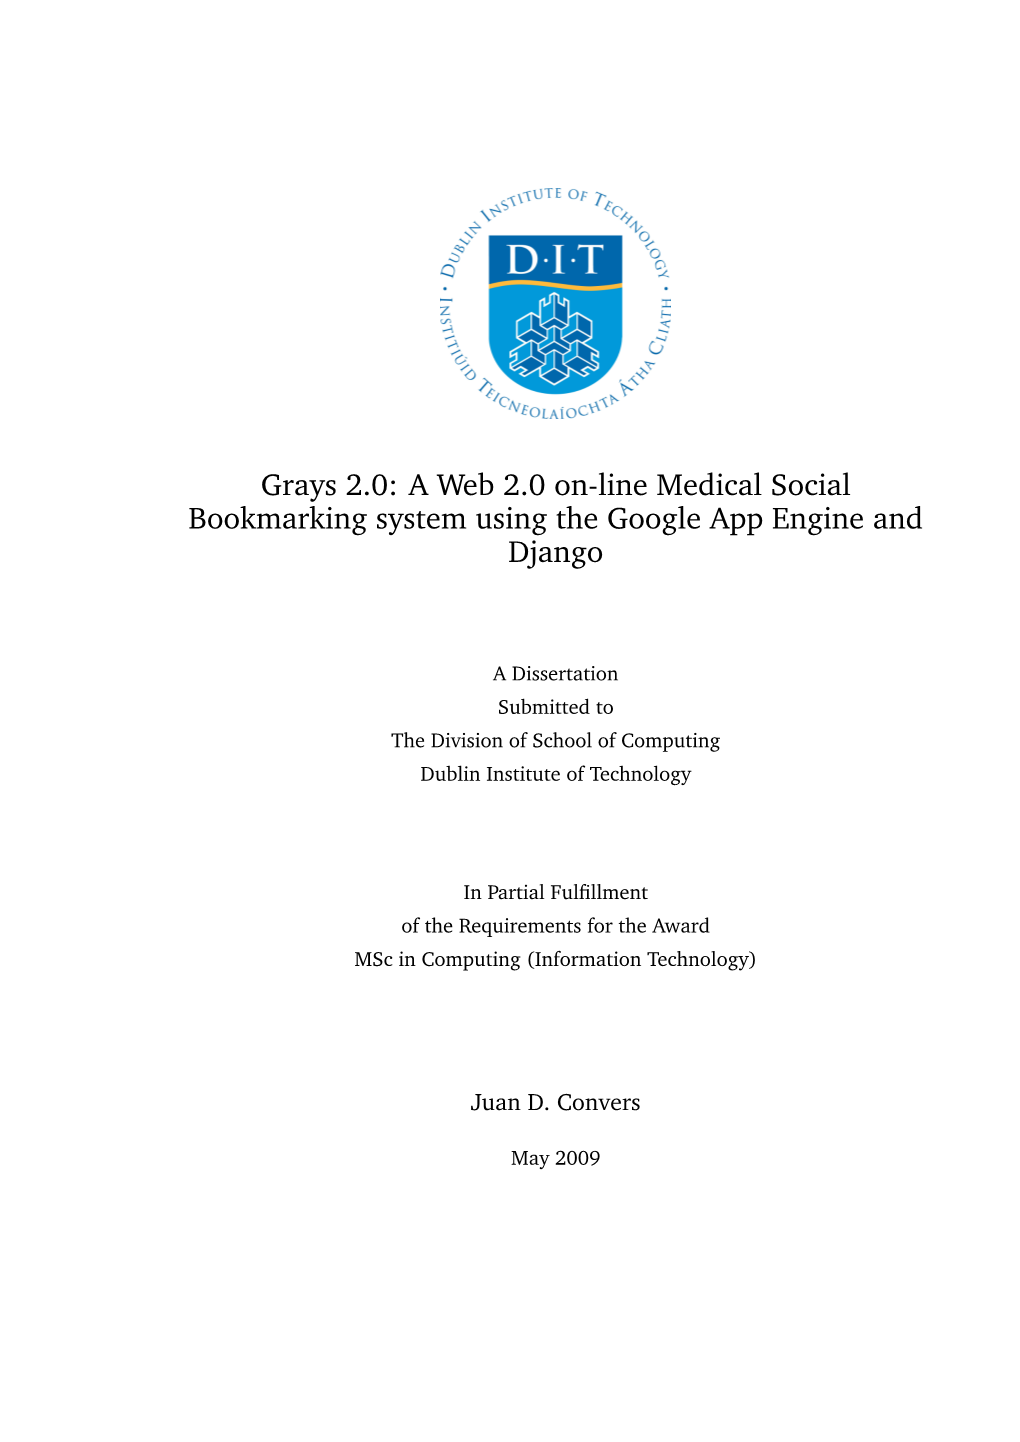 The Development of an Online Medical Social Bookmarking System